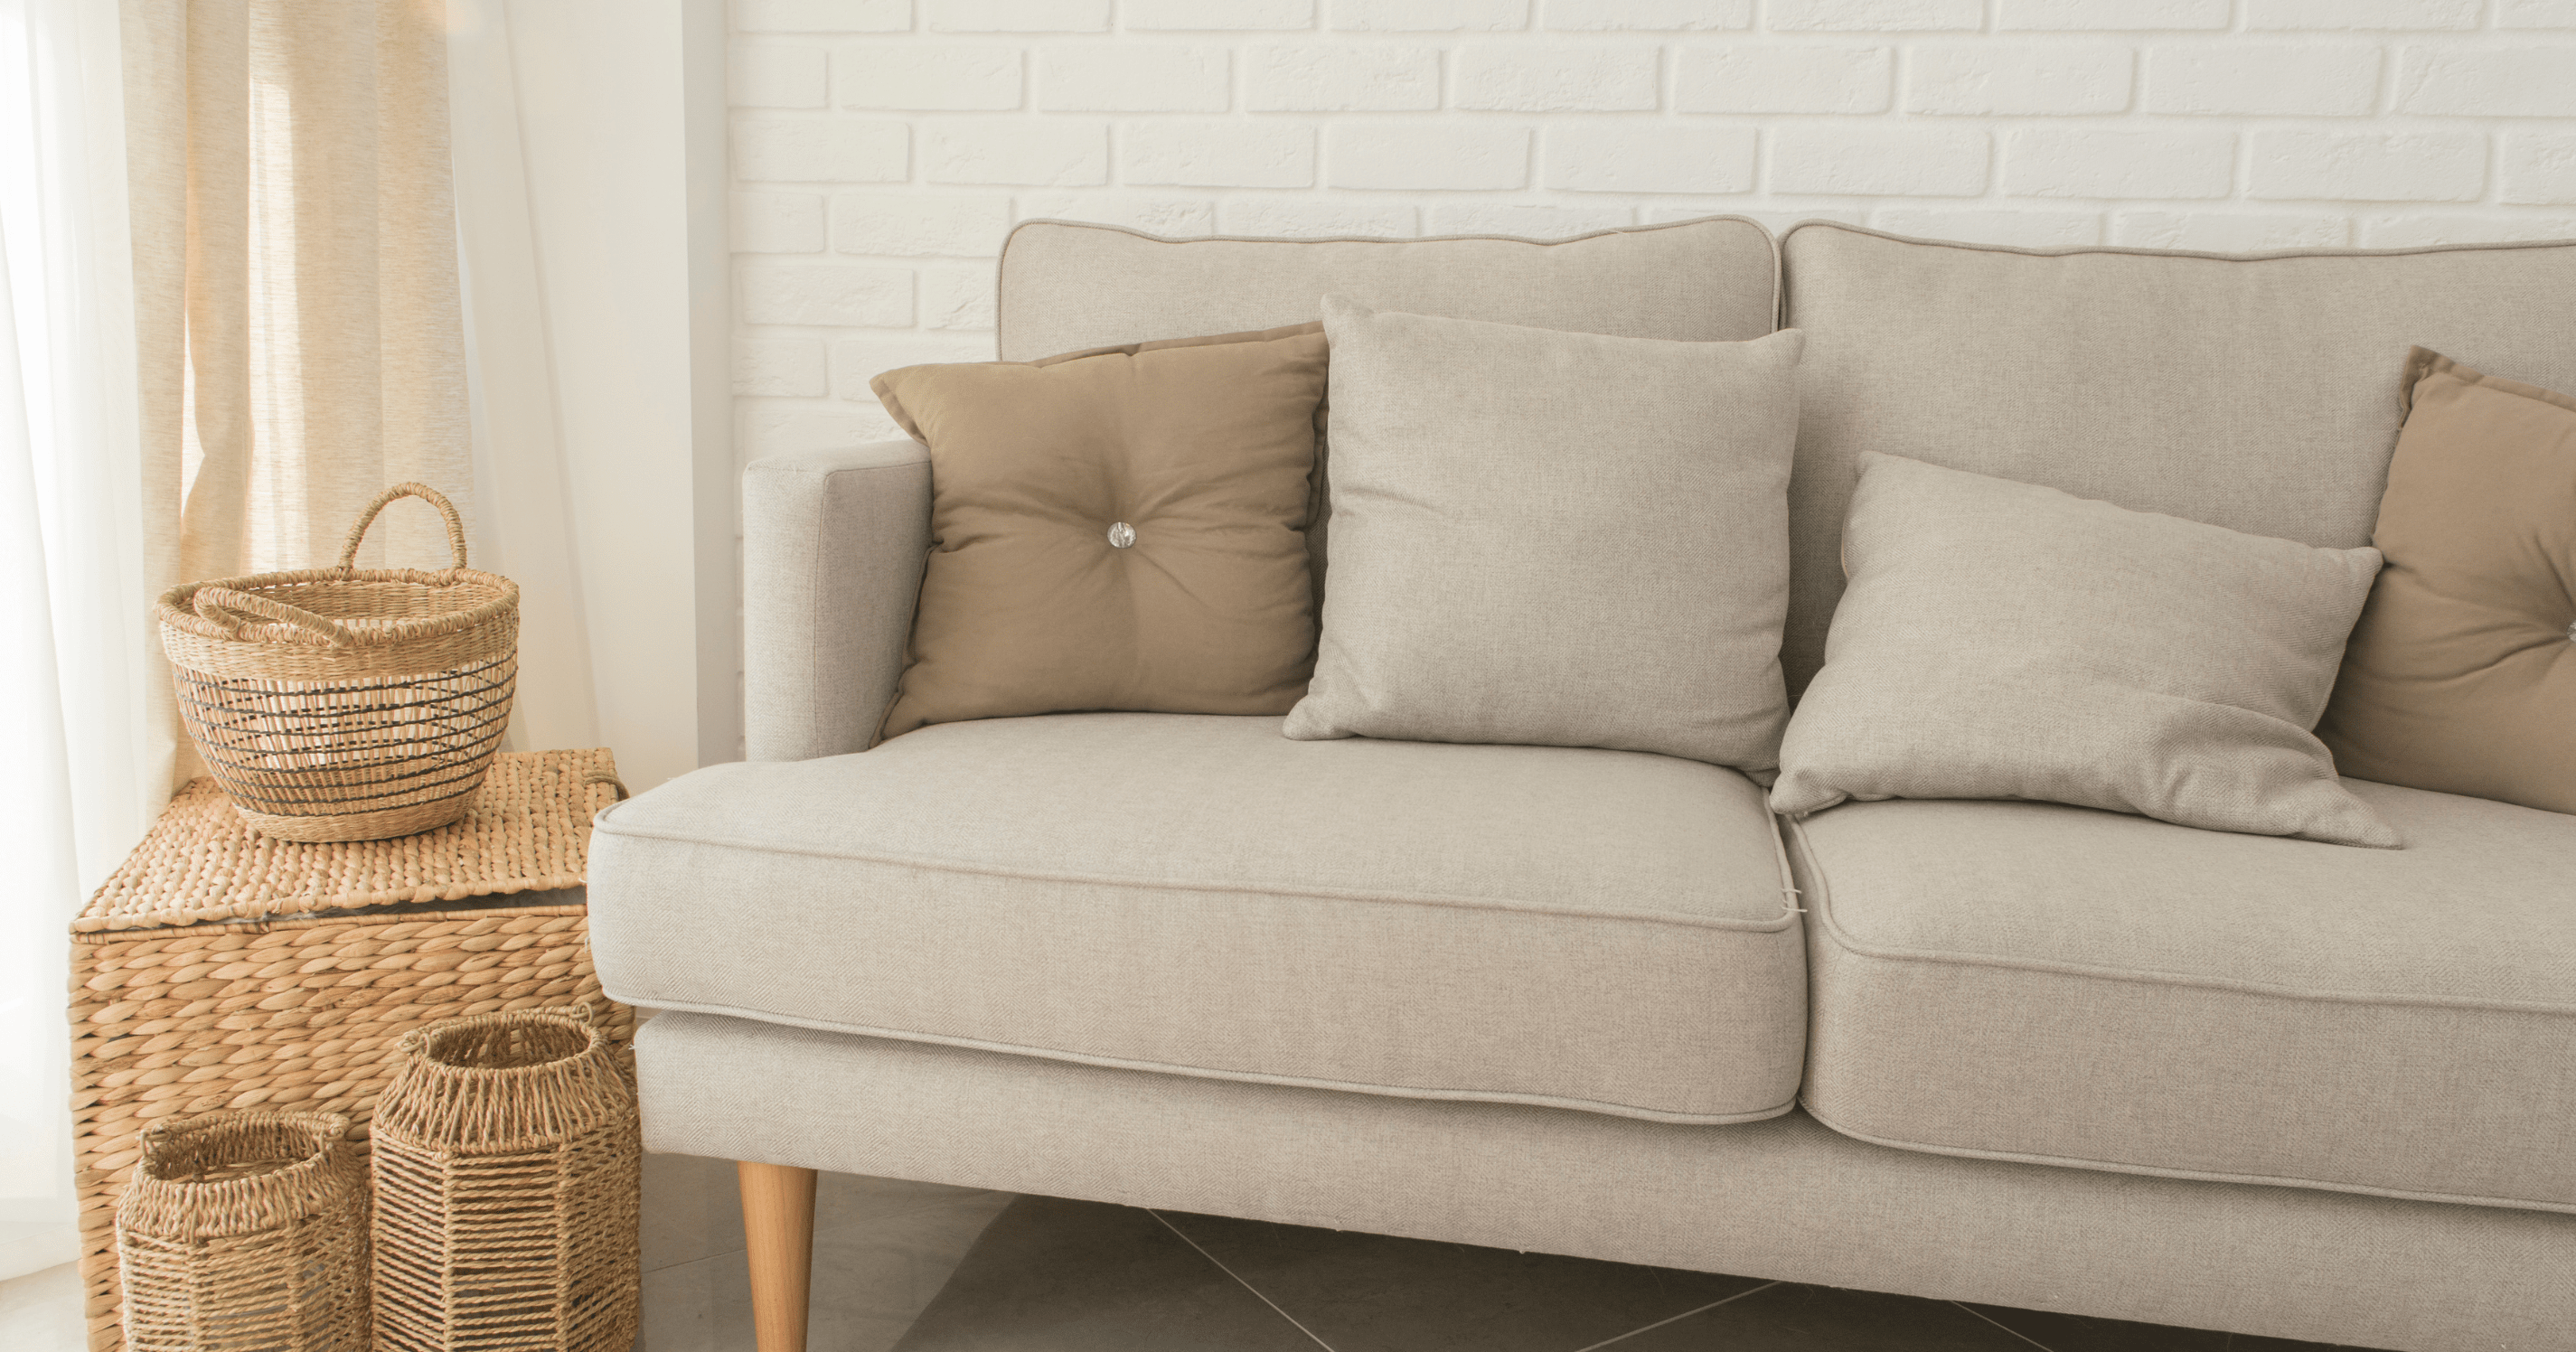 A stock image of a sofa - start your property search on Share to Buy!